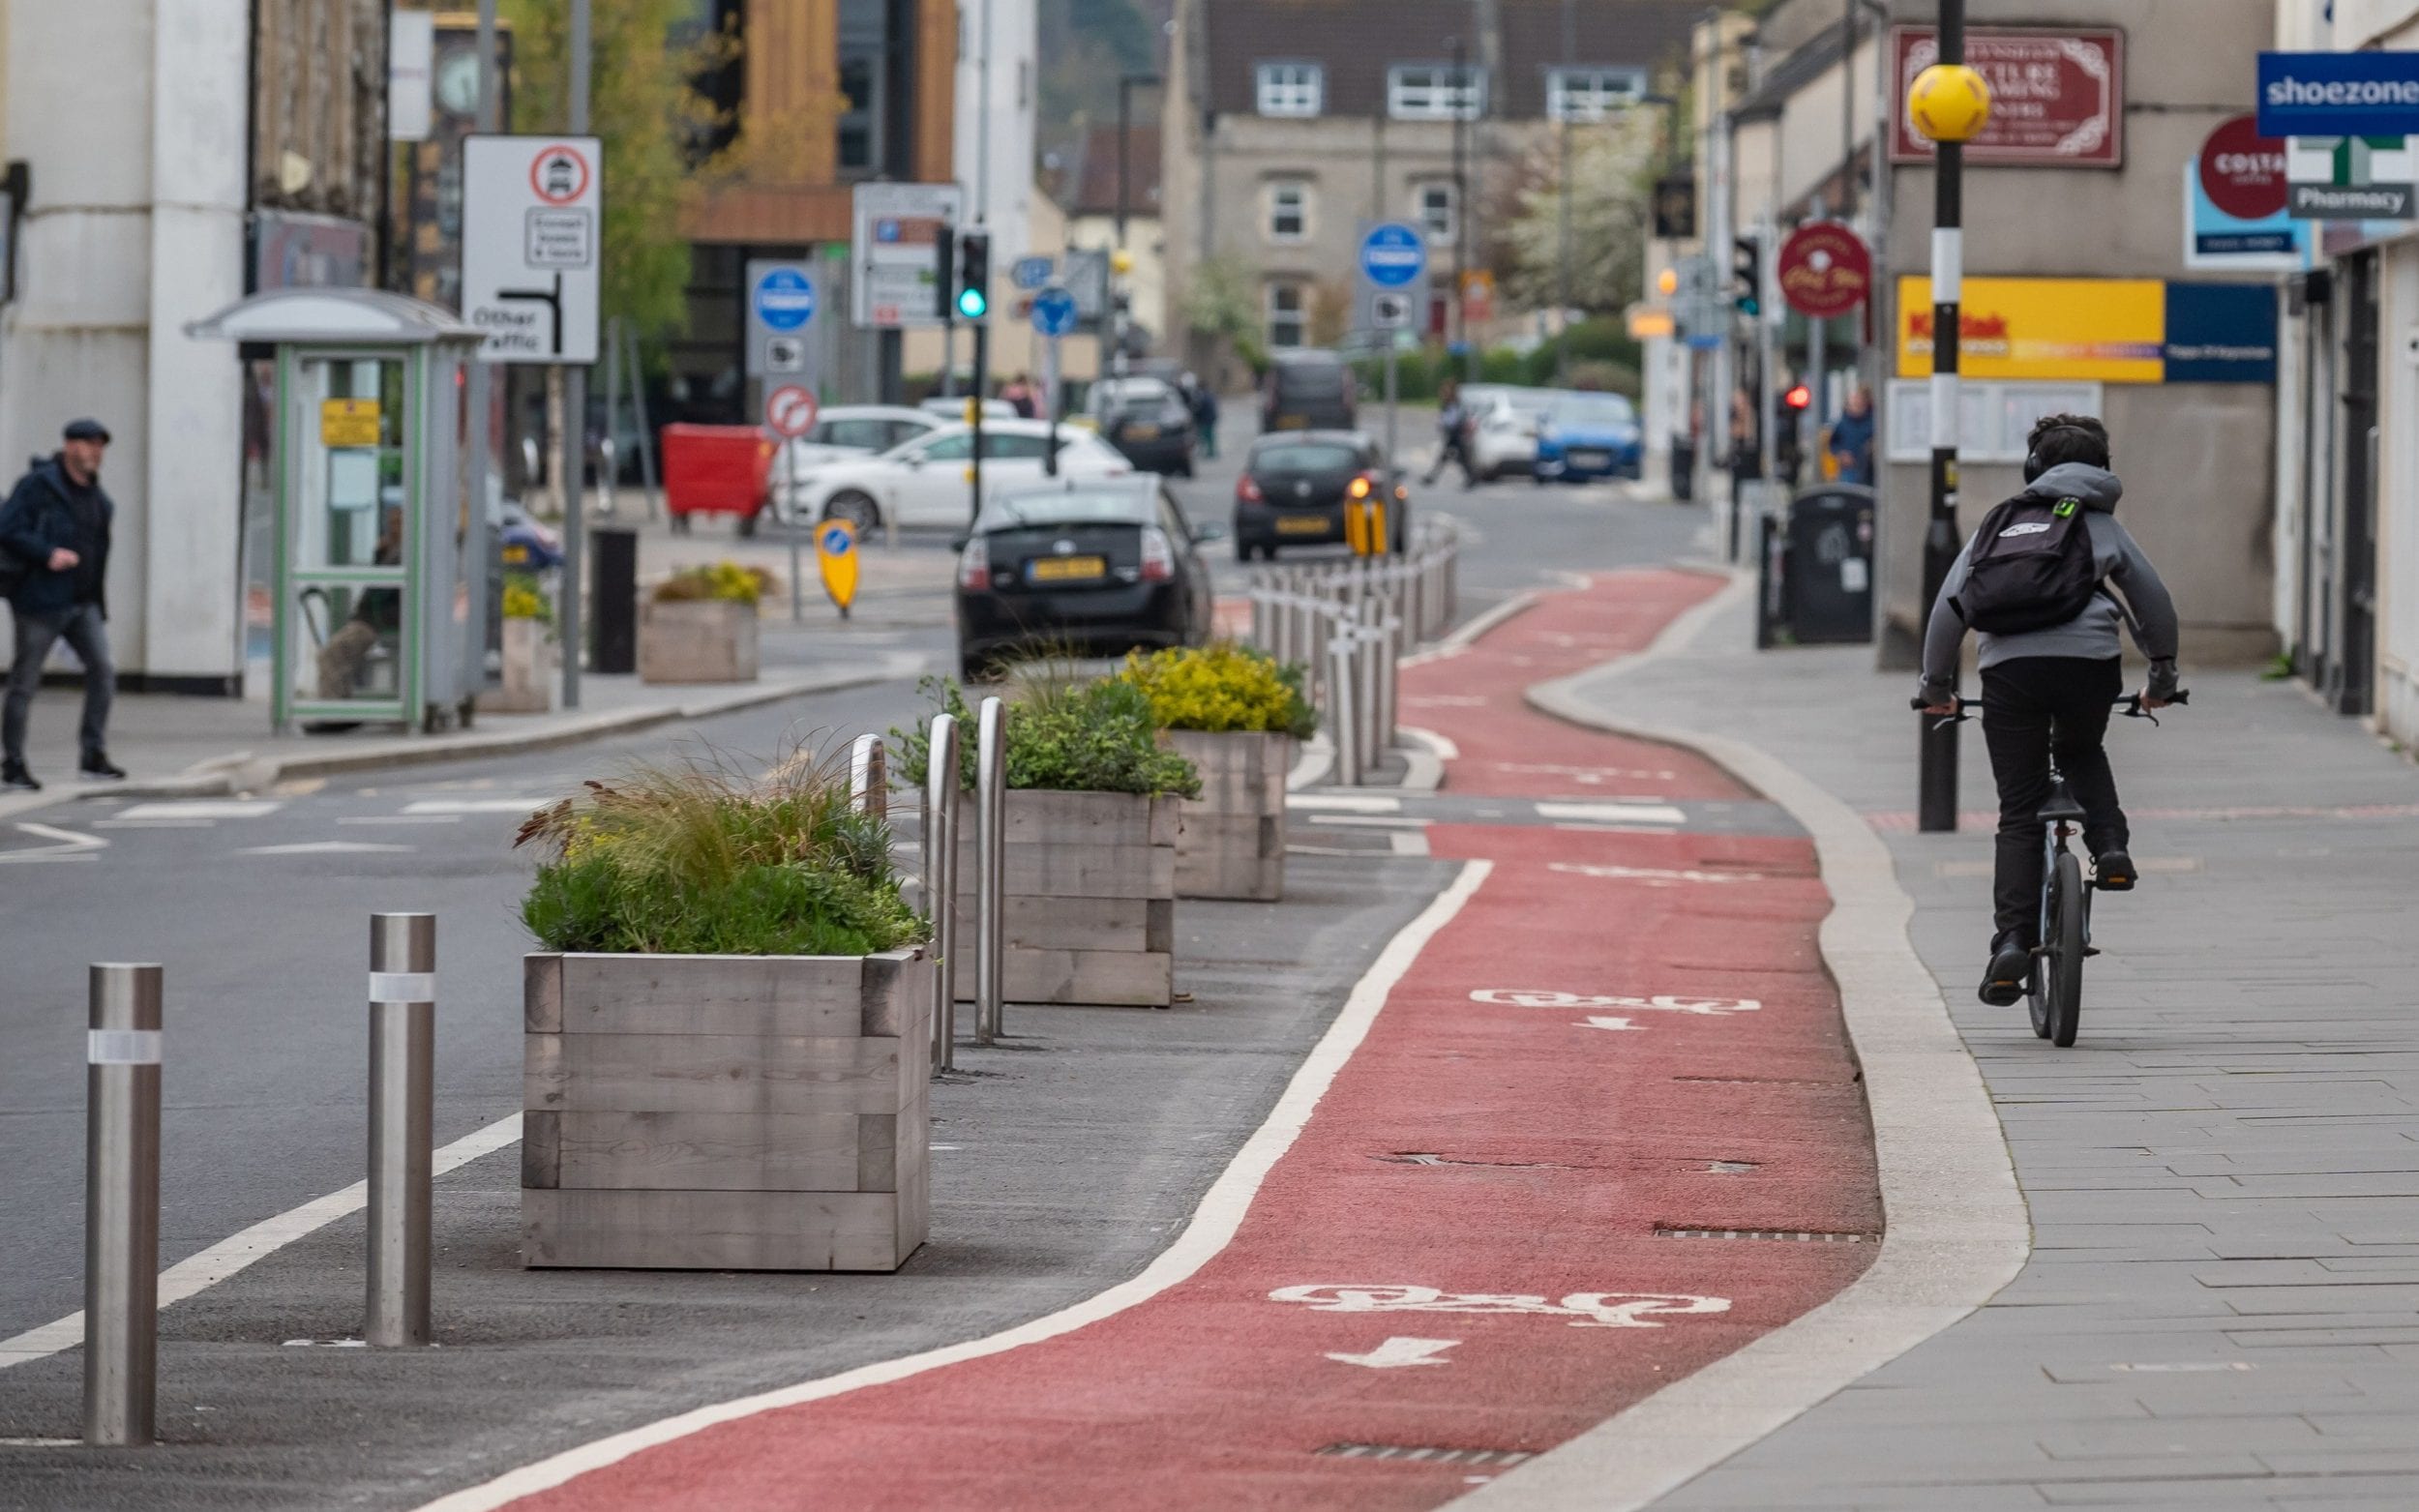 hundreds of people are tripping on this ‘optical illusion’ cycle lane